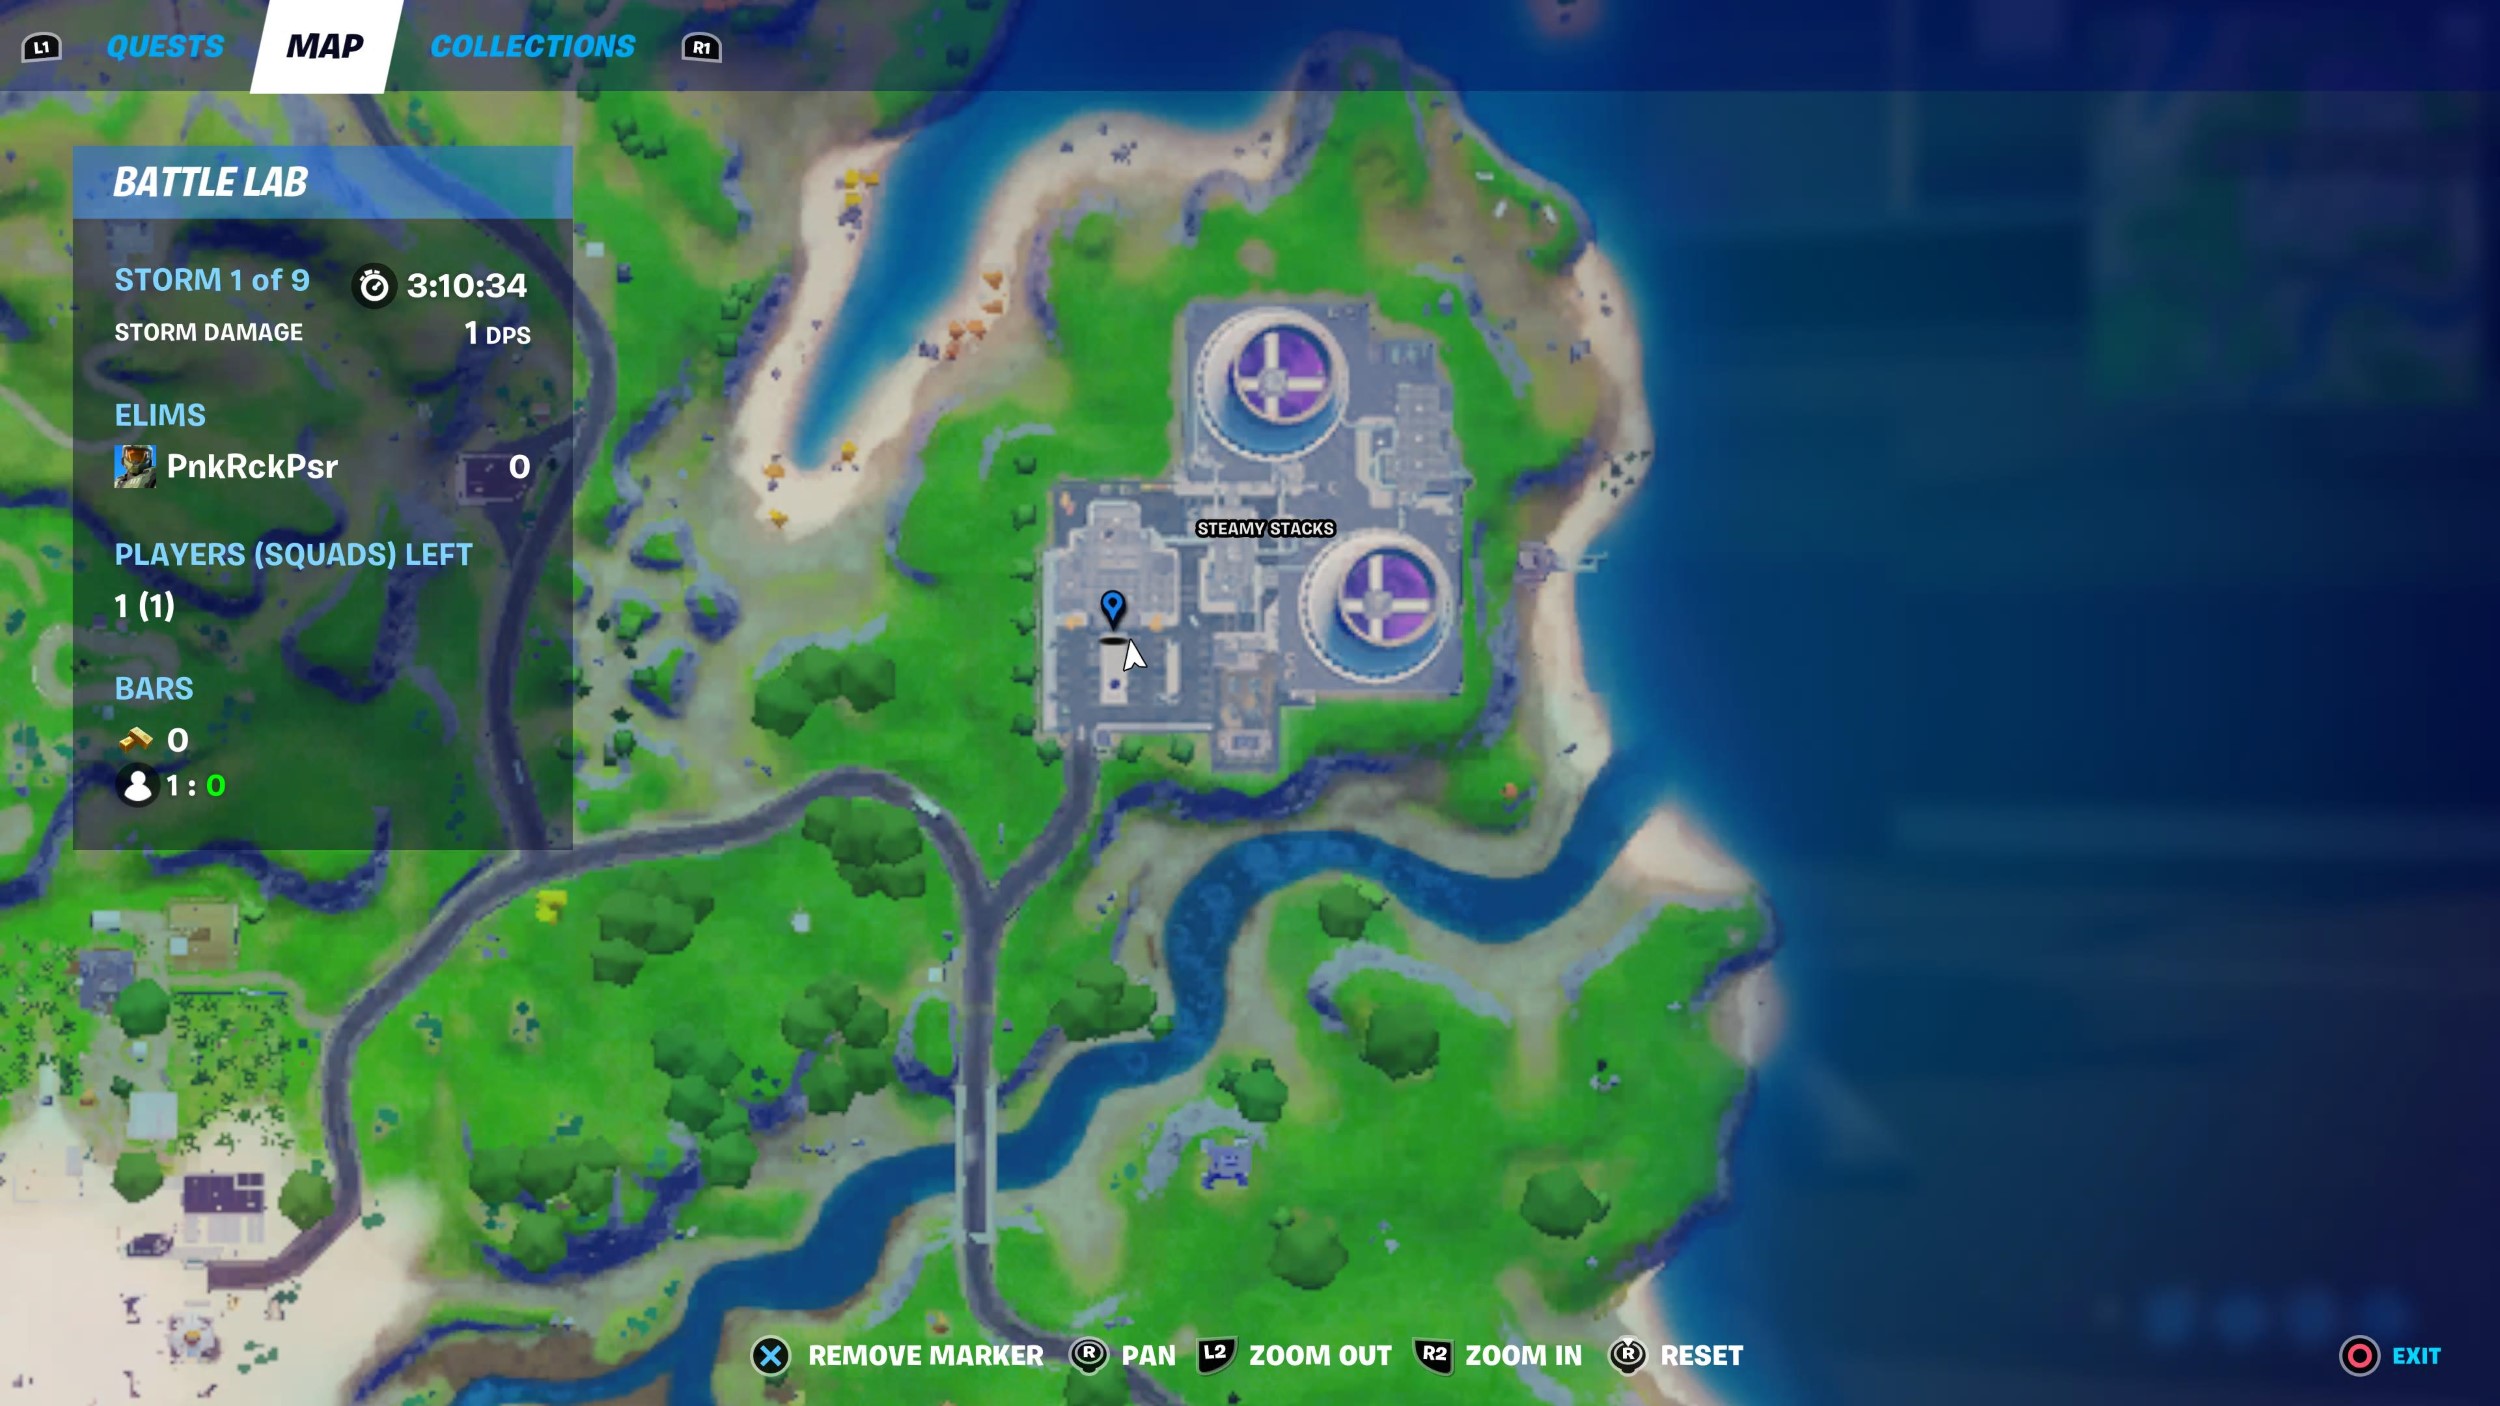 Fortnite Location With A Pool Fortnite Purple Pool At Steamy Stacks Location For Week 13 Challenges